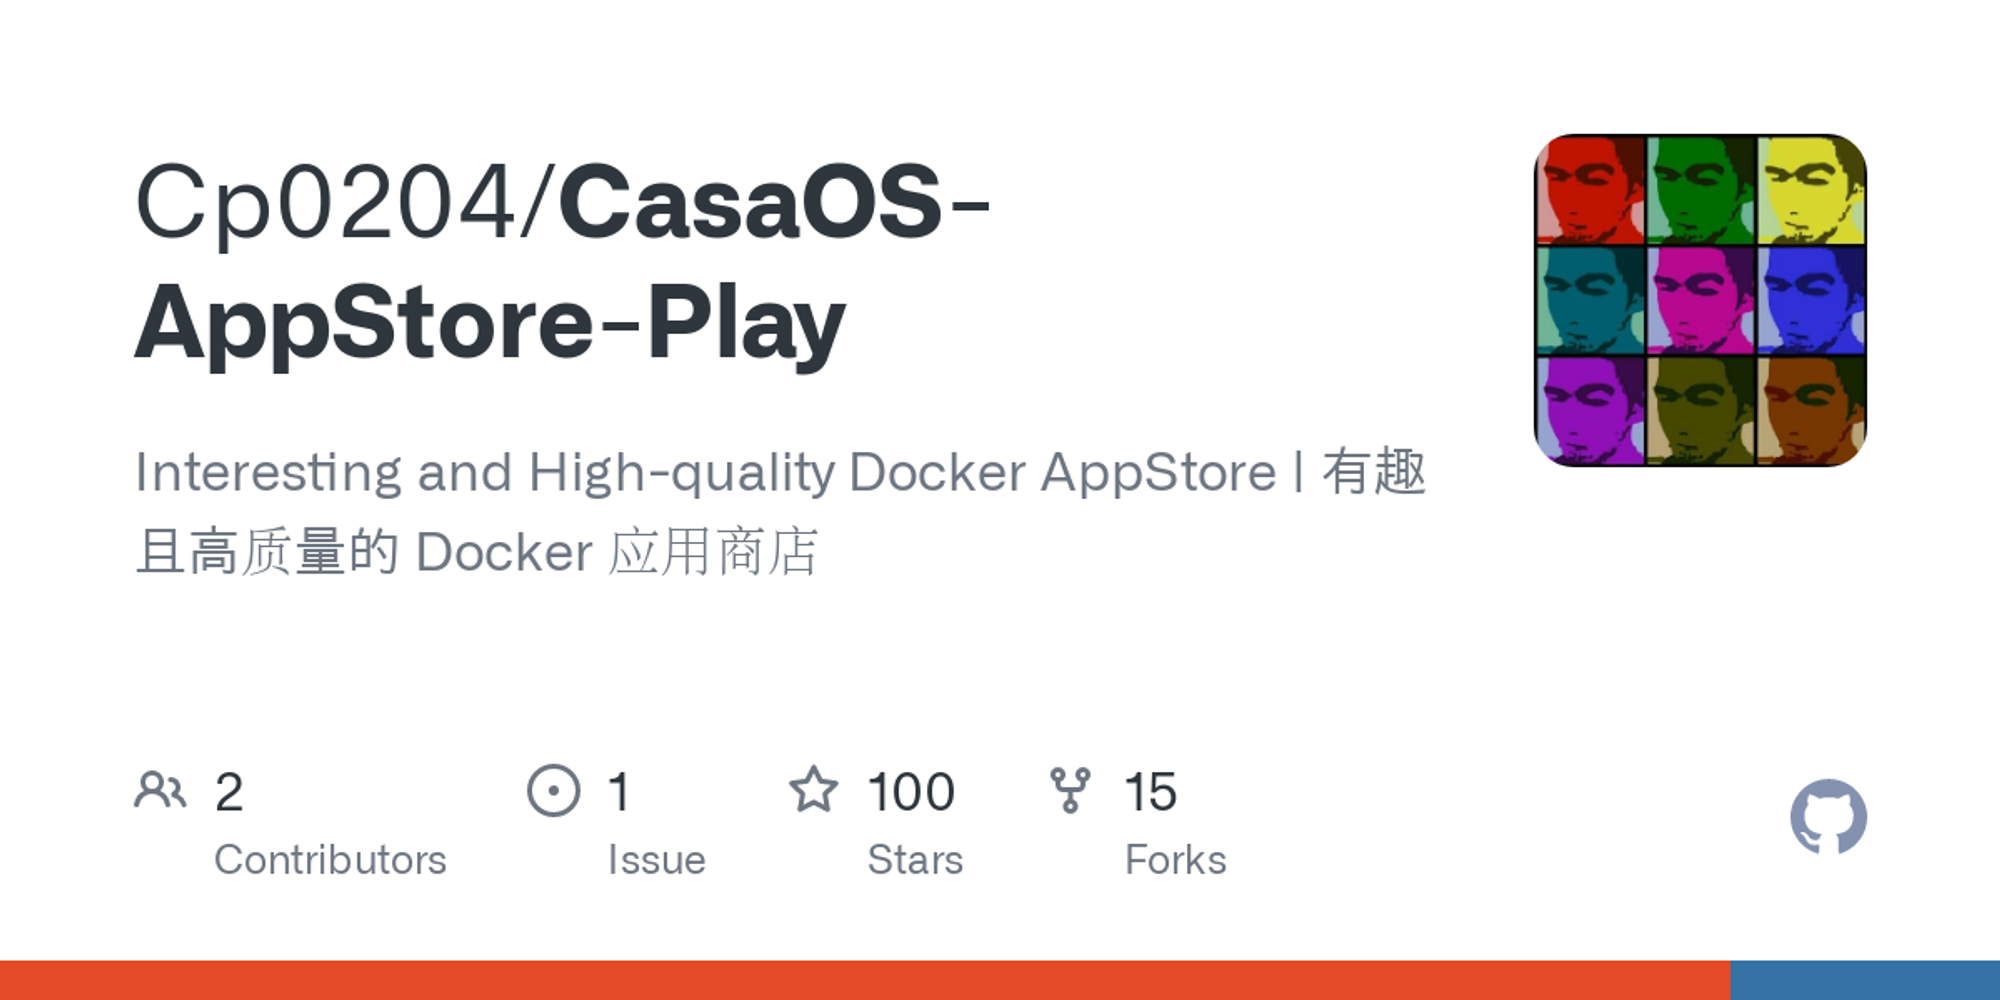 GitHub - Cp0204/CasaOS-AppStore-Play: A not-so-serious CasaOS App Store. 一个不是很正经的 CasaOS 应用商店。